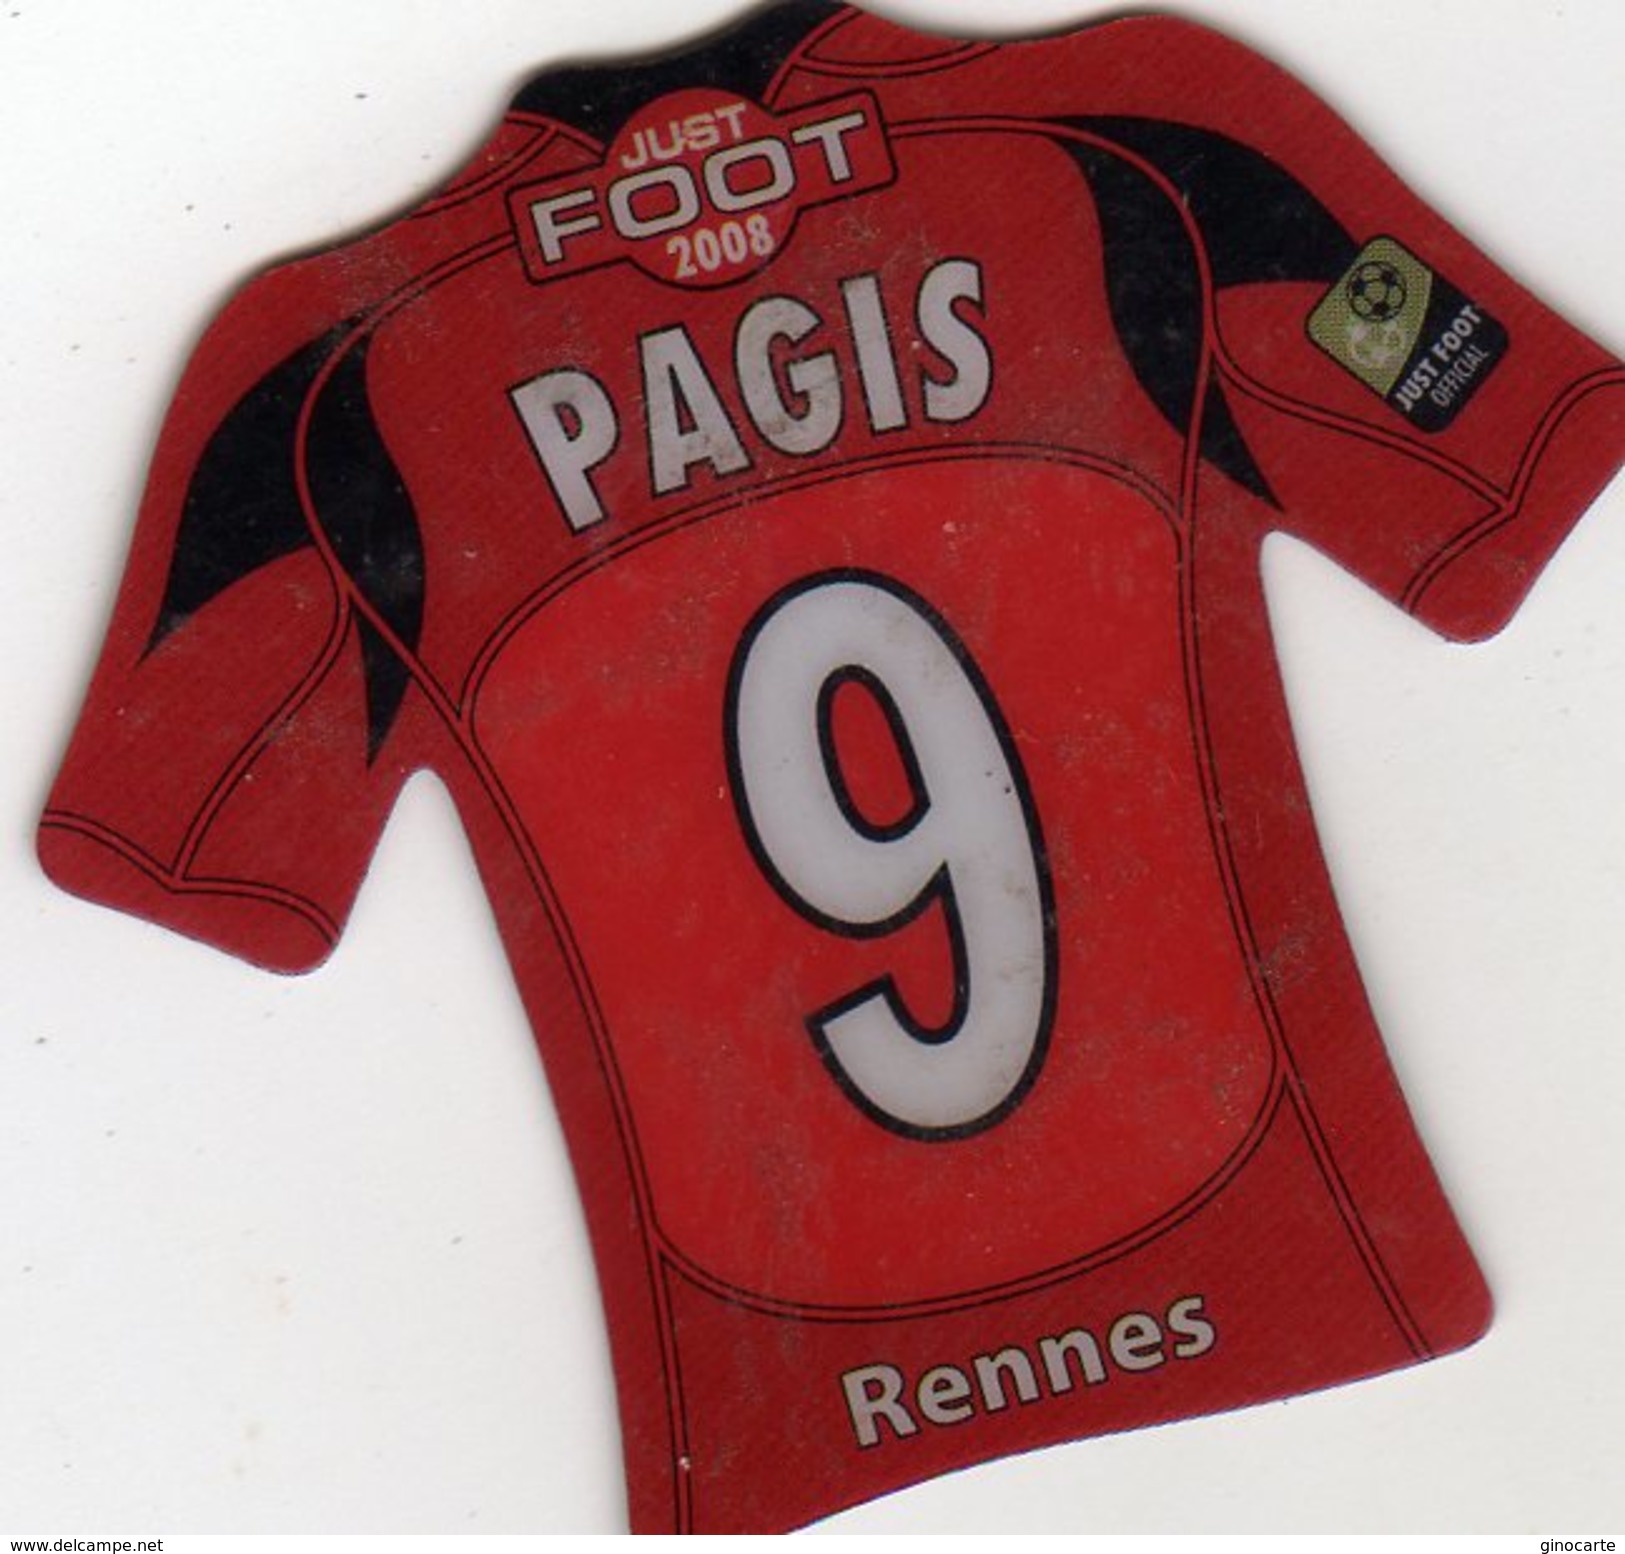 Magnet Magnets Maillot De Football Pitch Rennes Pagis 2008 - Sports